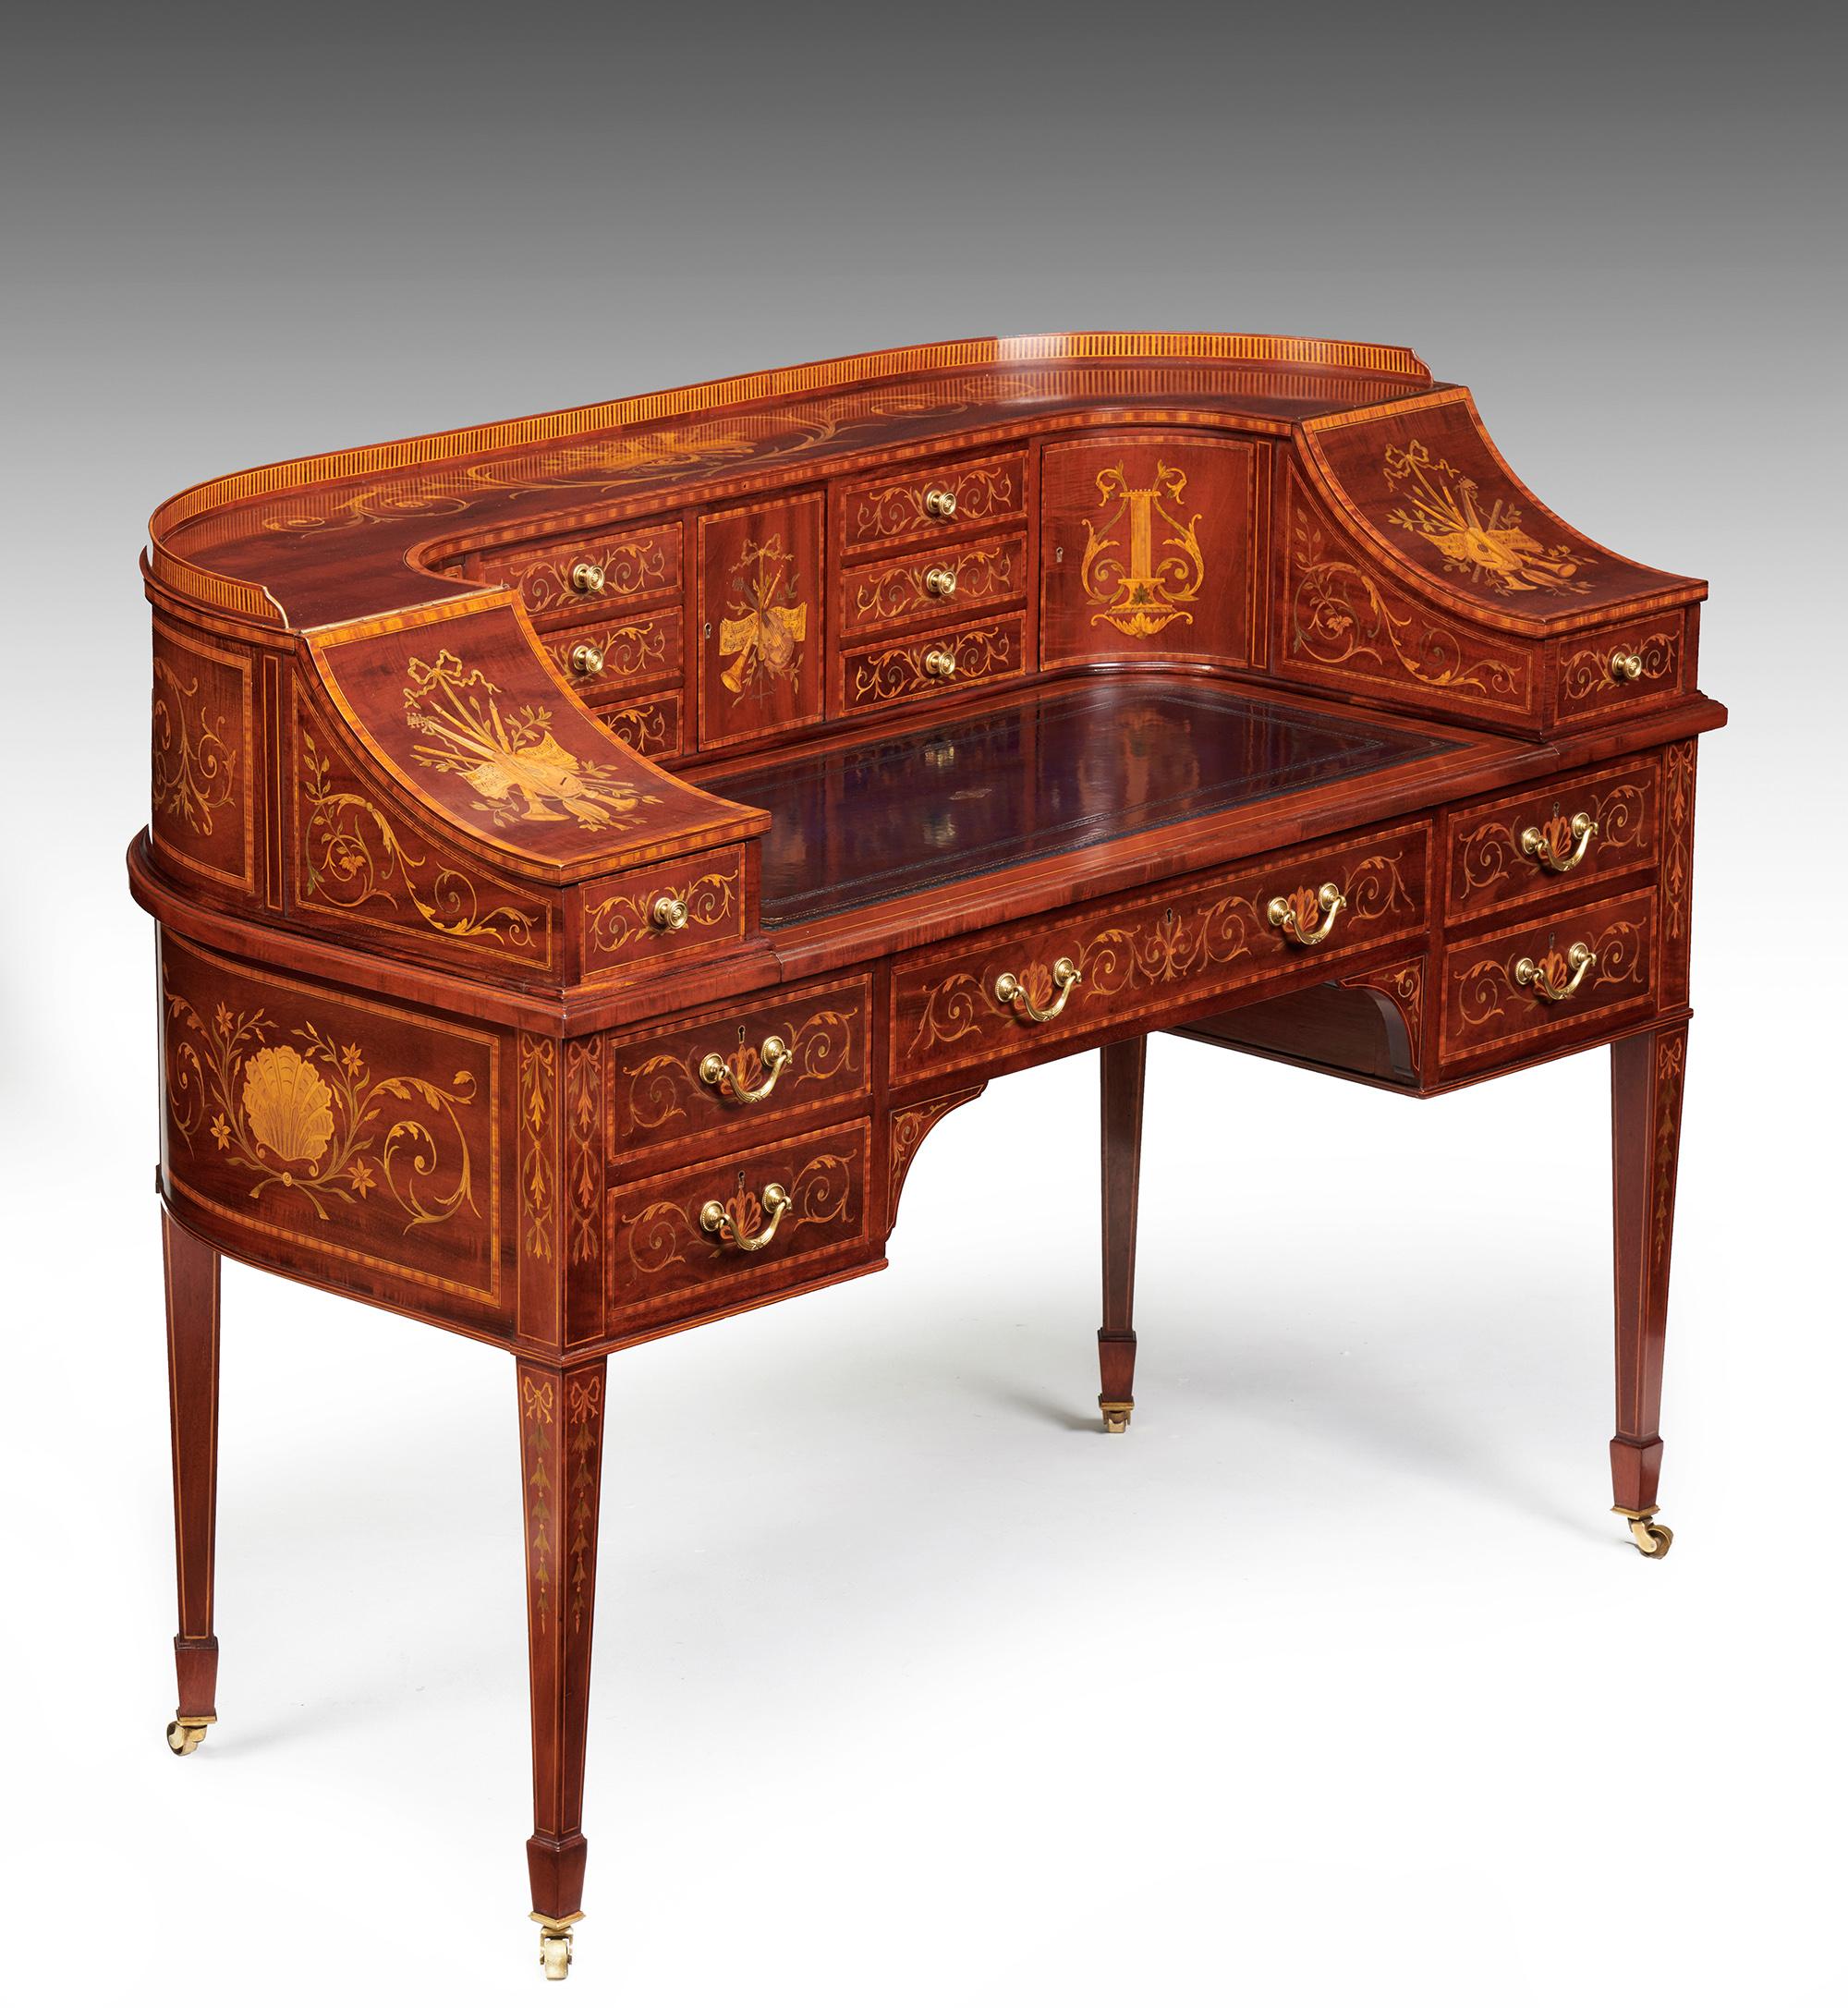 English Maple & Co Mahogany, Satinwood and Marquetry Inlaid Victorian Carlton House Desk